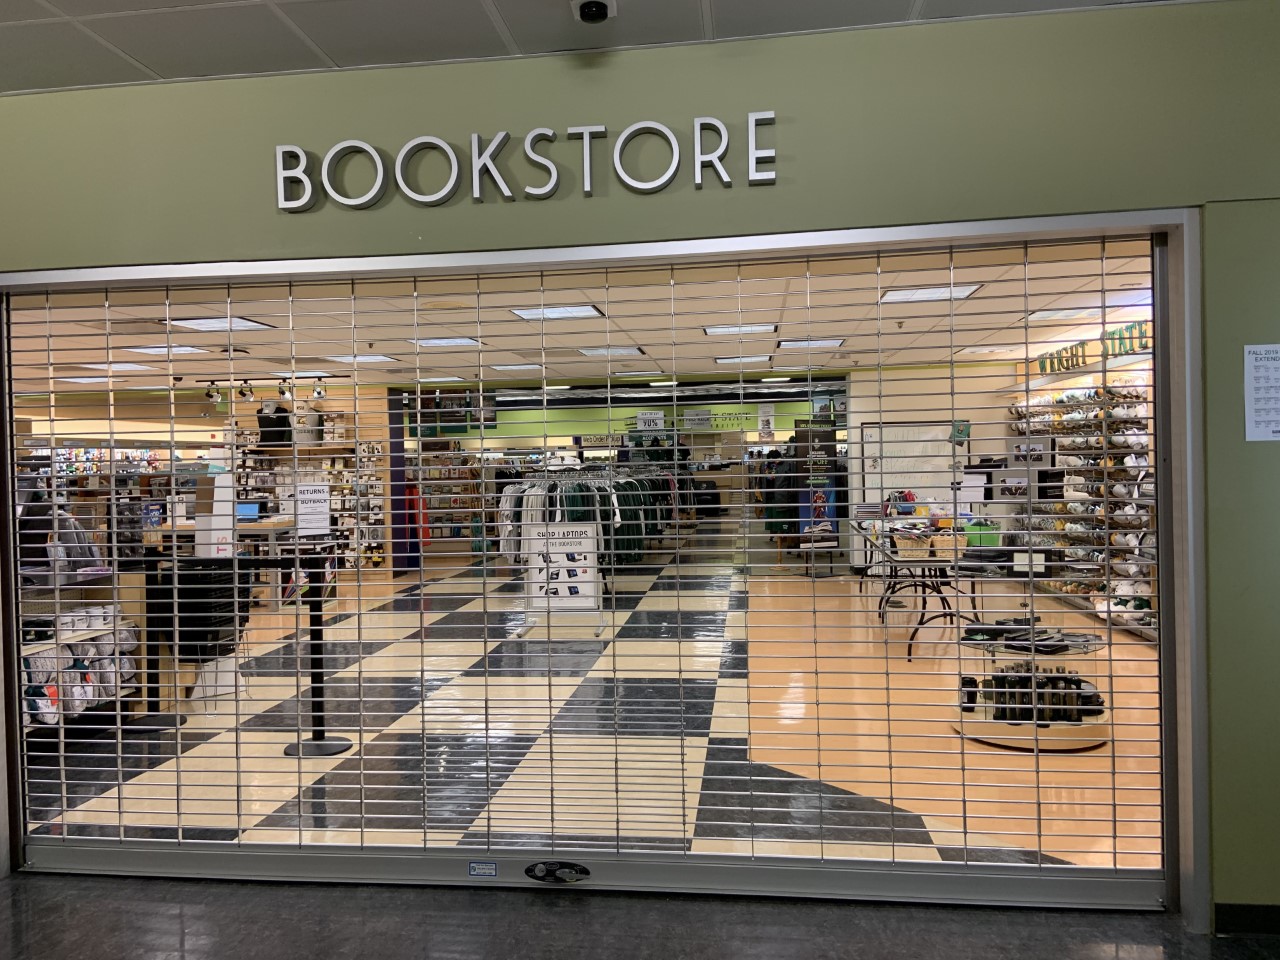 Wright State University Bookstore | Photo by Natalie Cunningham | The Wright State Guardian